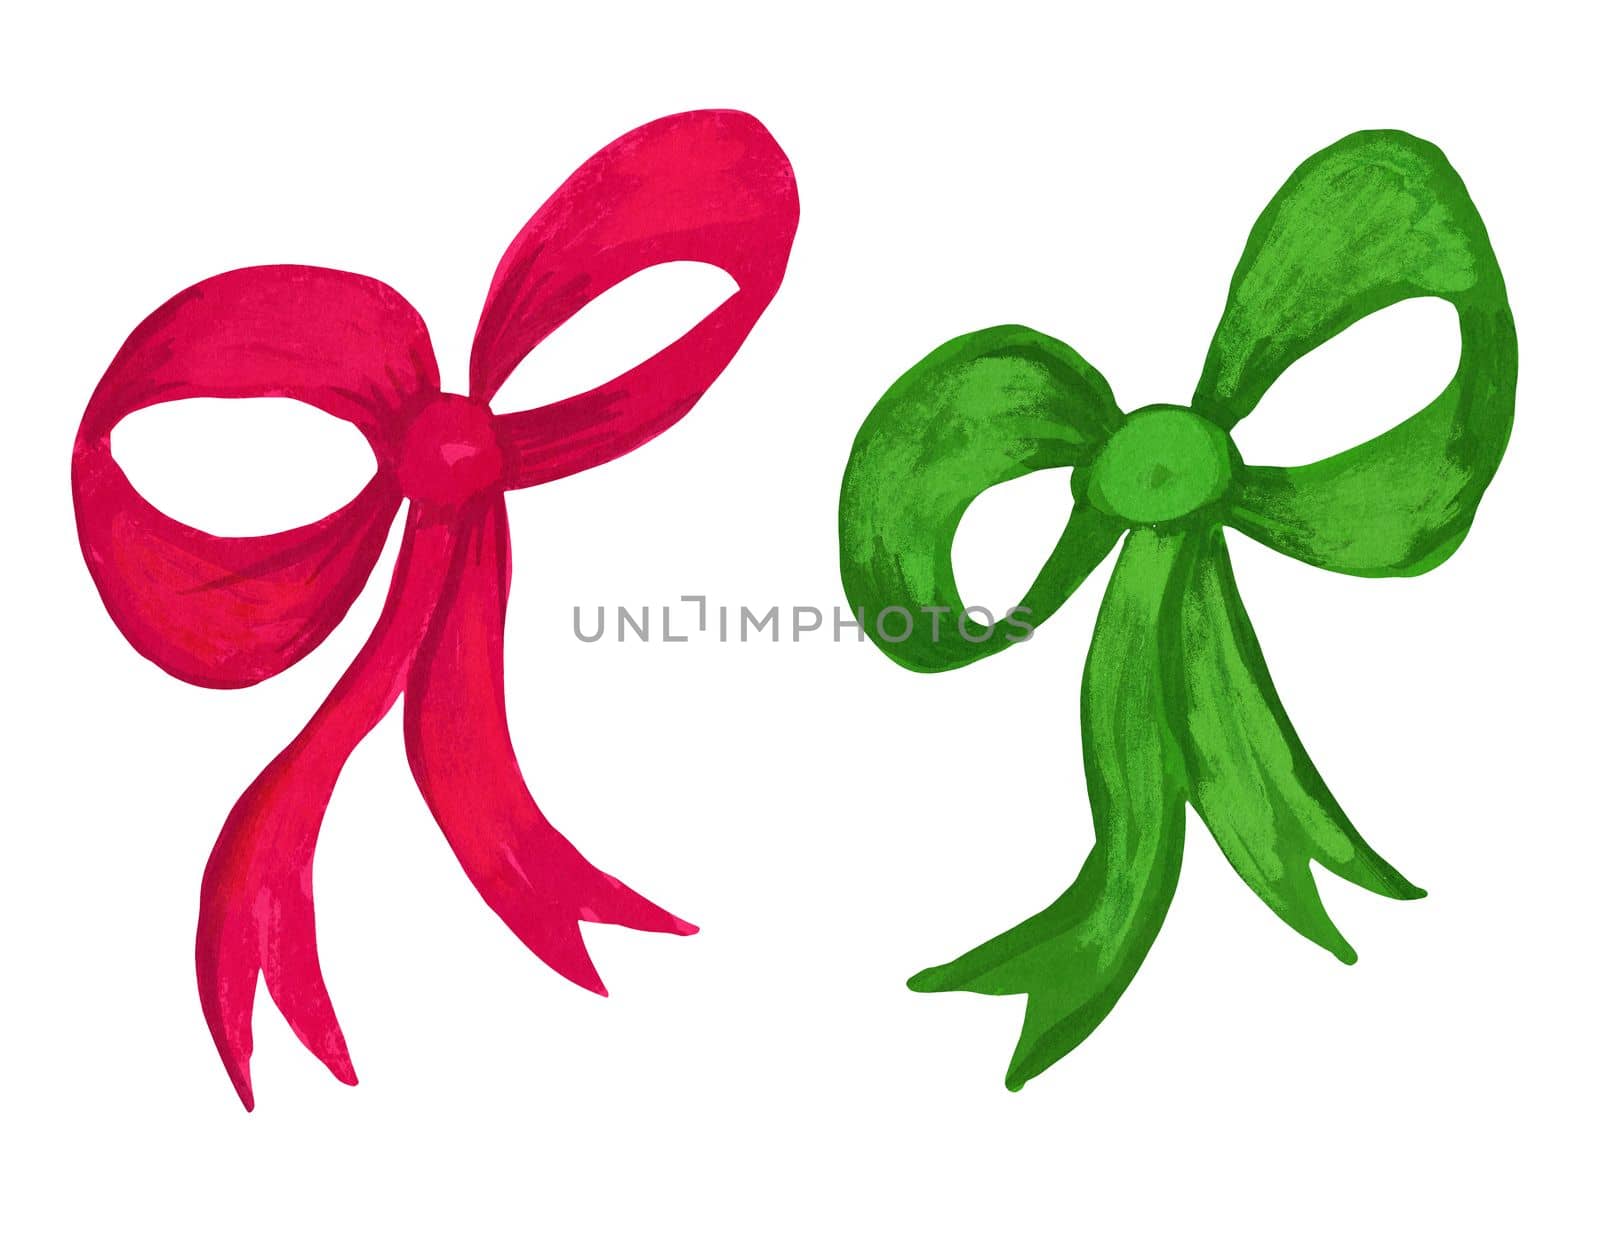 Watercolor hand drawn illustration of red green christmas ribbon bows. Cute bright minimalist decor for winter holiday greeting cards invitations, retro vintage ornament, simple minimalist style.. by Lagmar